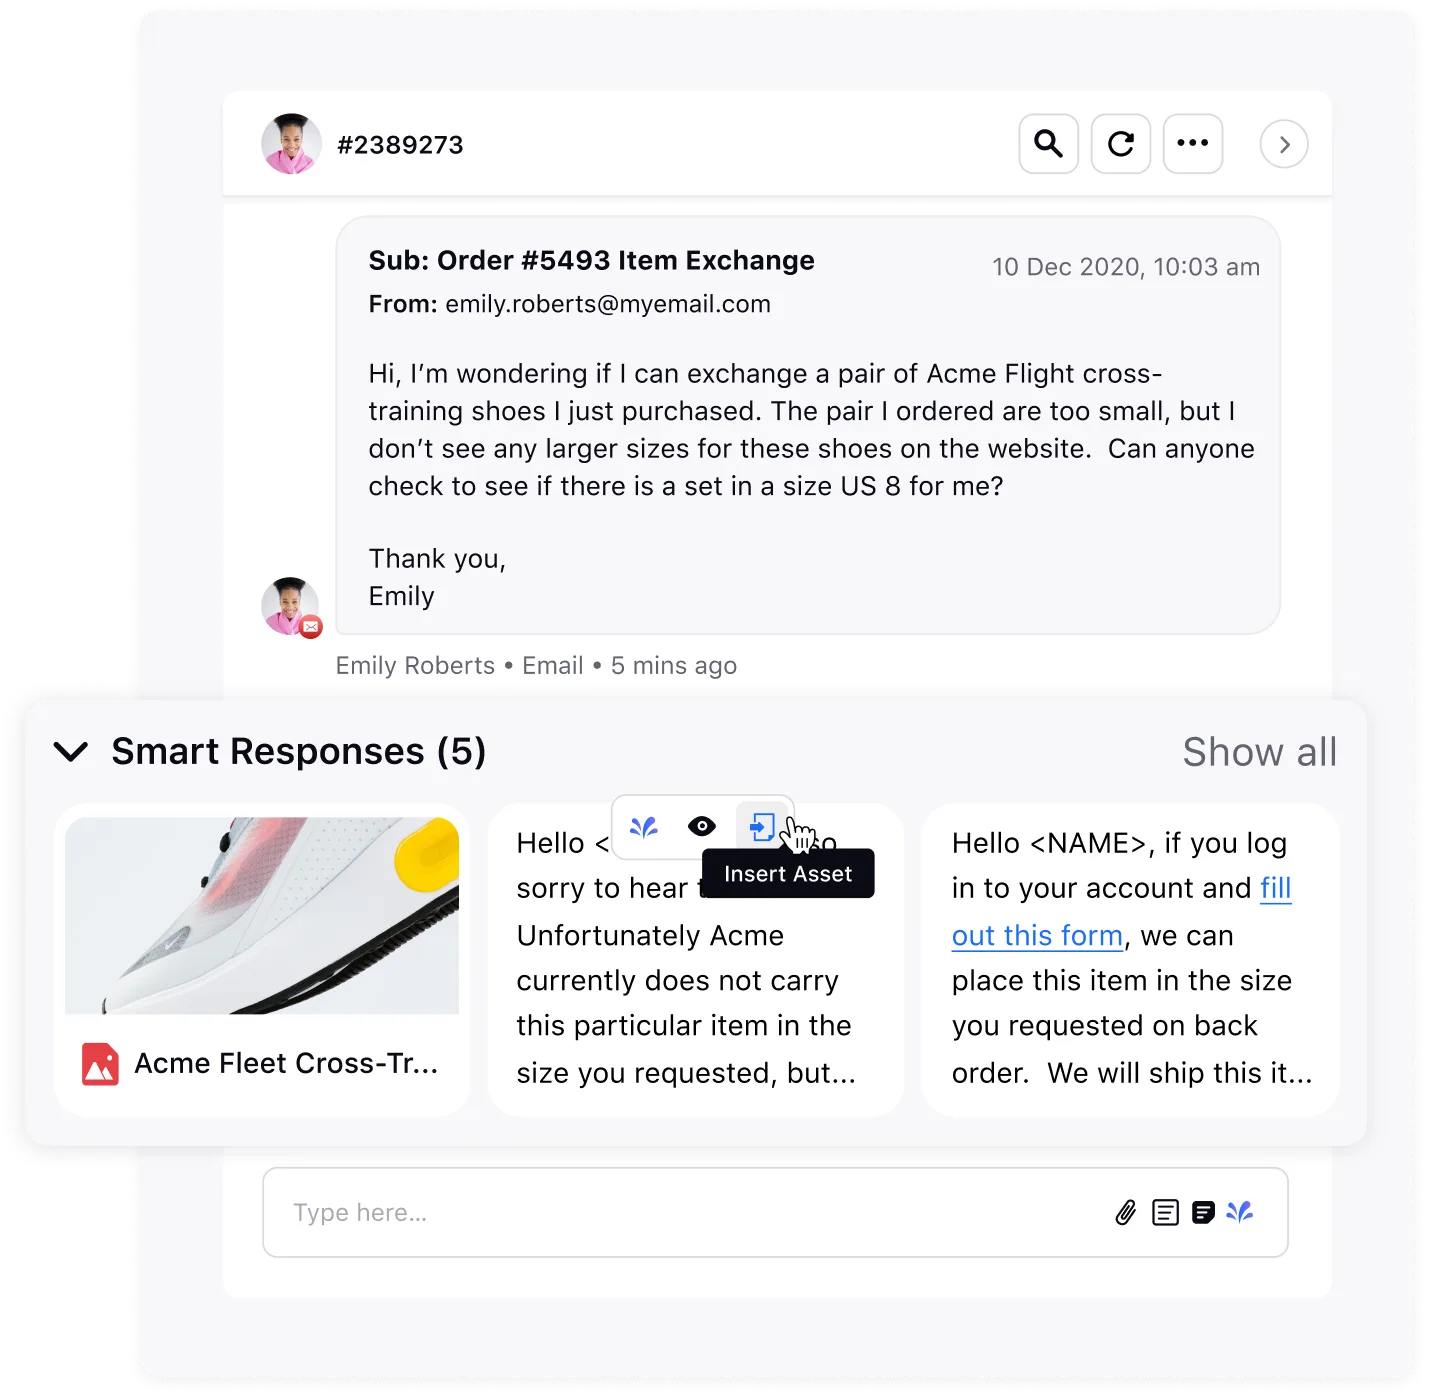 AI-powered smart responses powered by Sprinklr Service